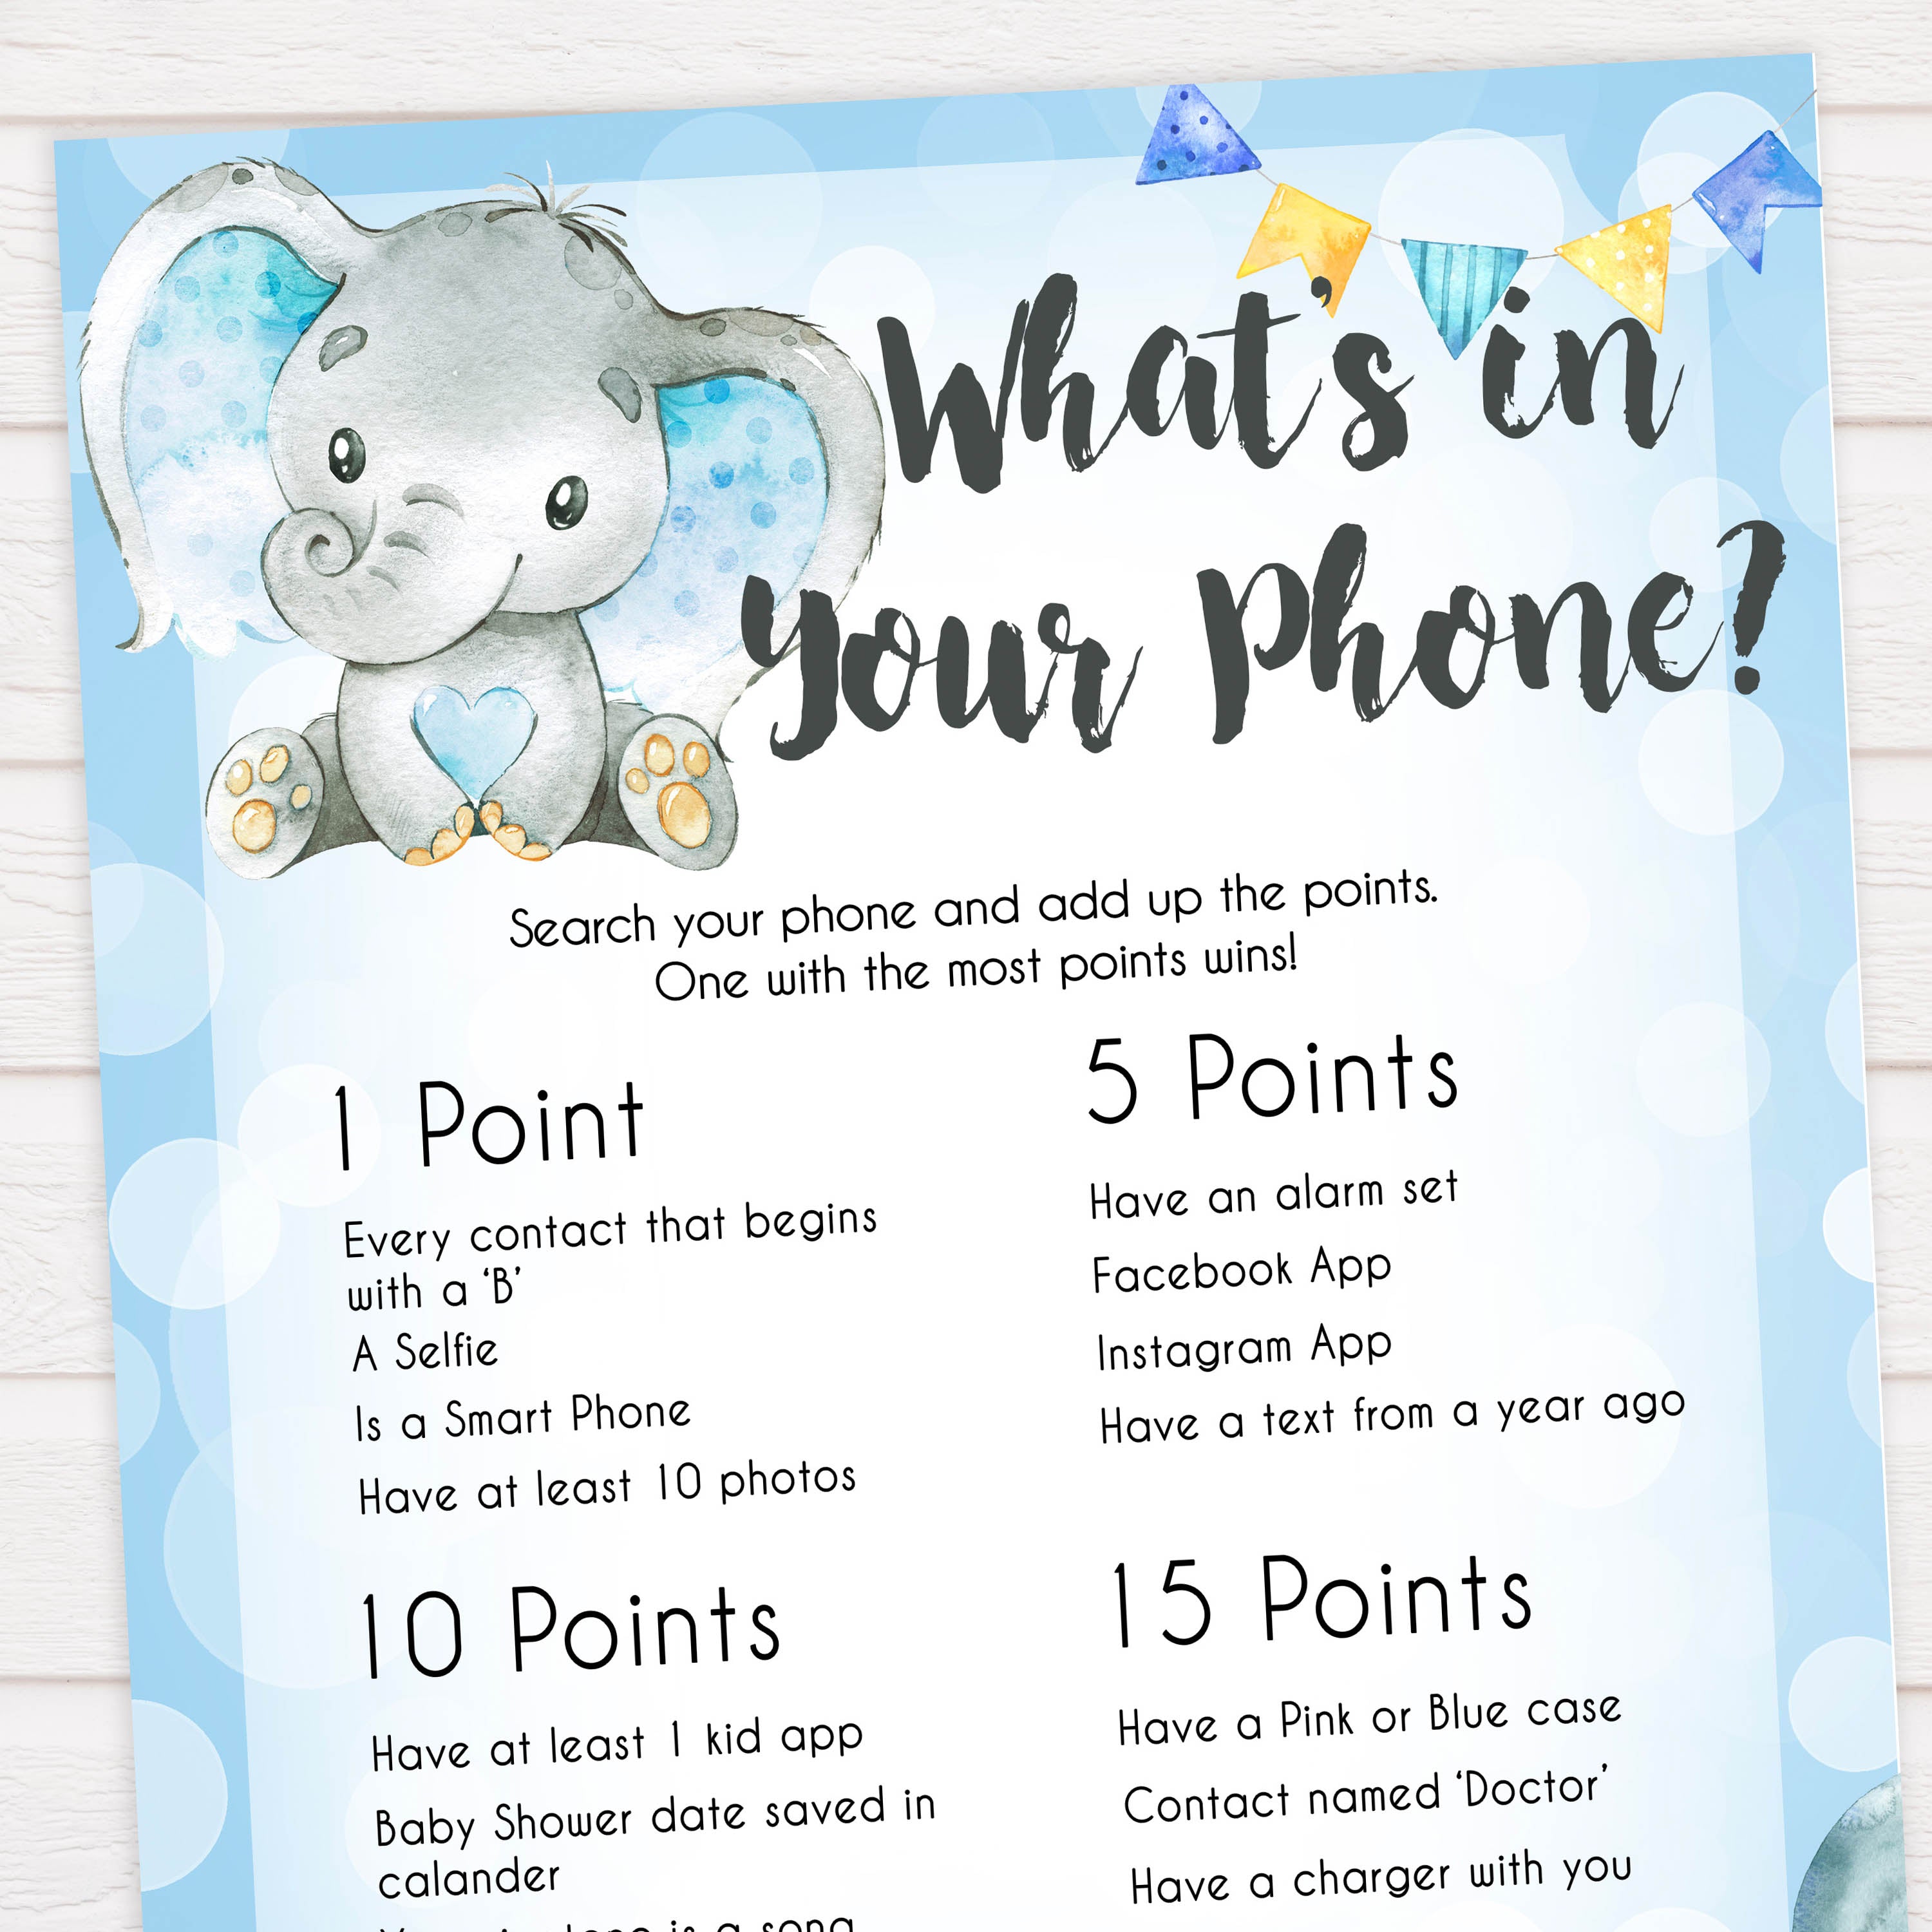 Blue elephant baby games, whats in your phone, elephant baby games, printable baby games, top baby games, best baby shower games, baby shower ideas, fun baby games, elephant baby shower